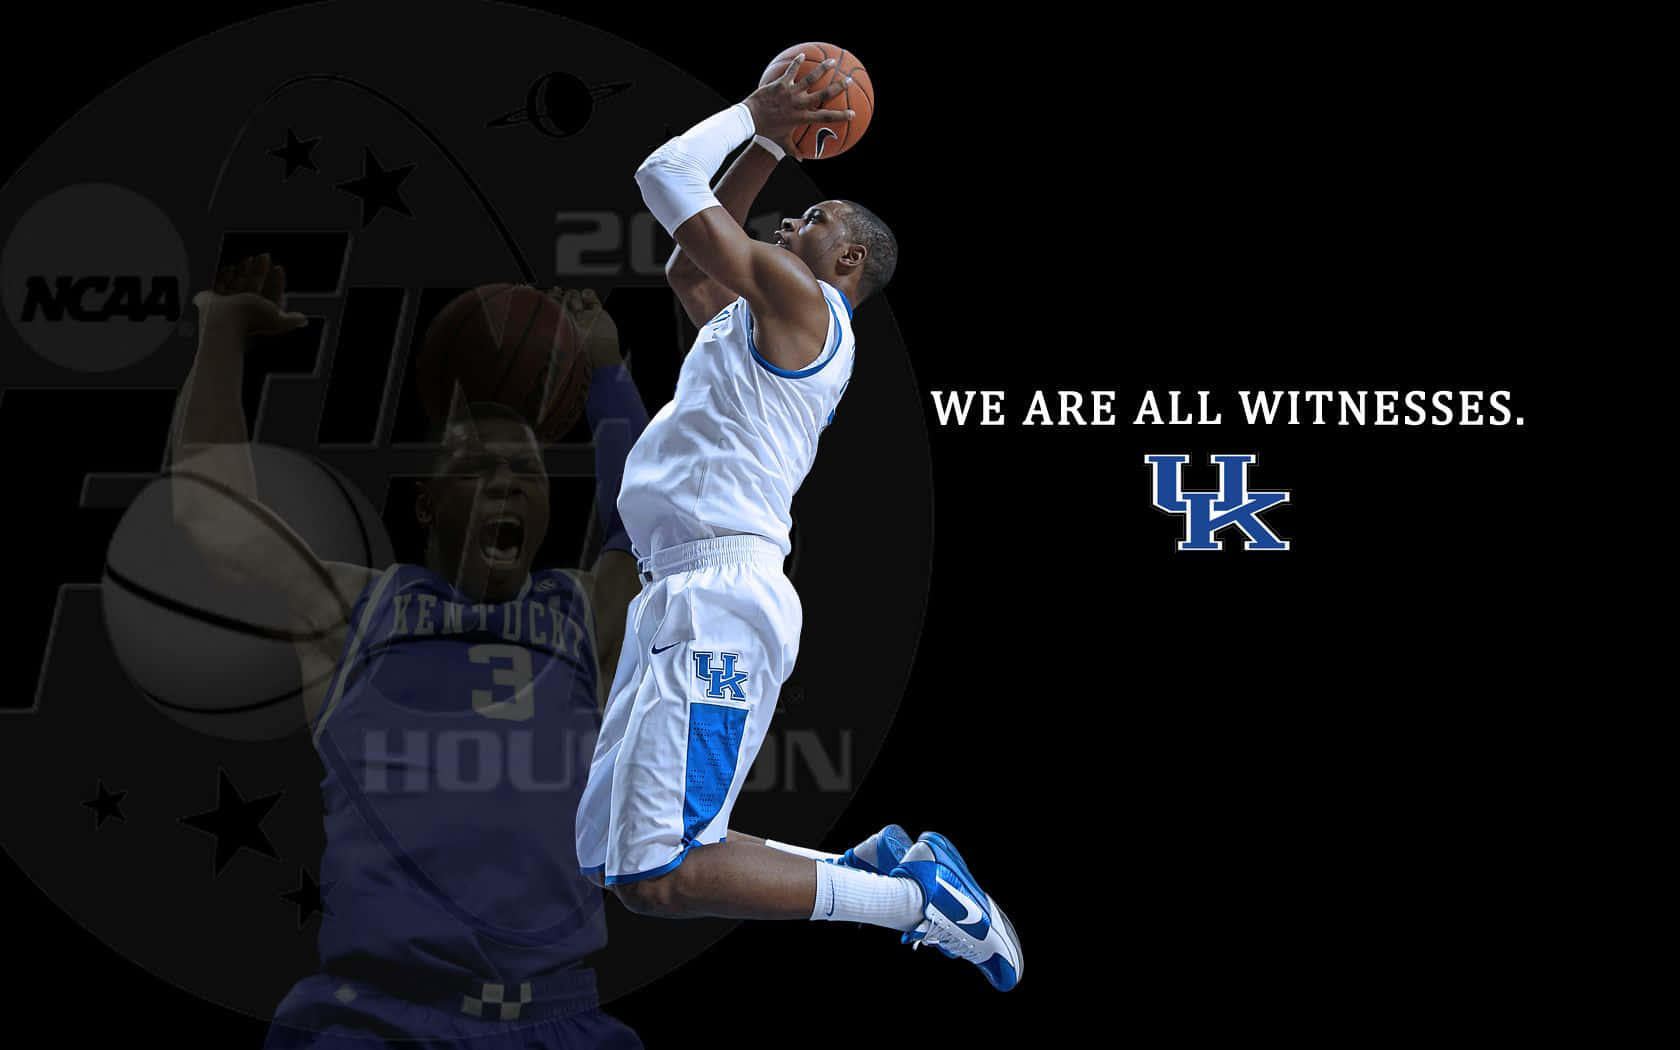 The Kentucky Wildcats proudly display their legacy of basketball excellence. Wallpaper